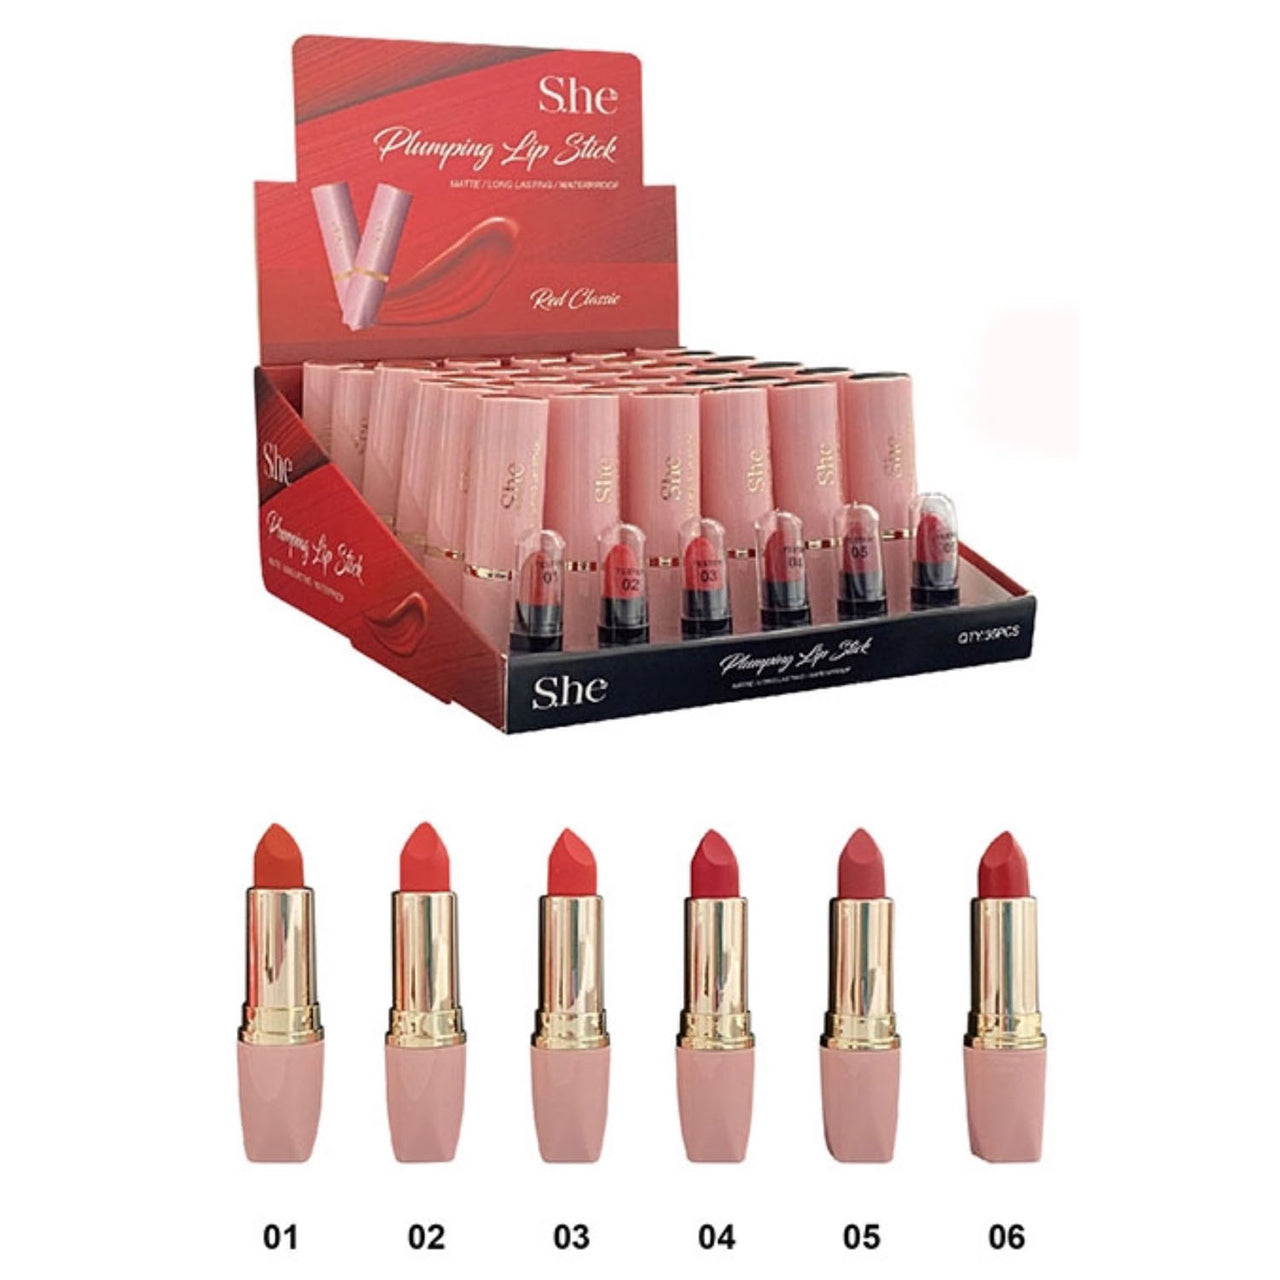 S.he LS520A Plumping Lipstick 'Nude Classic' with Samples Cosmetic Wholesale-Cosmeticholic